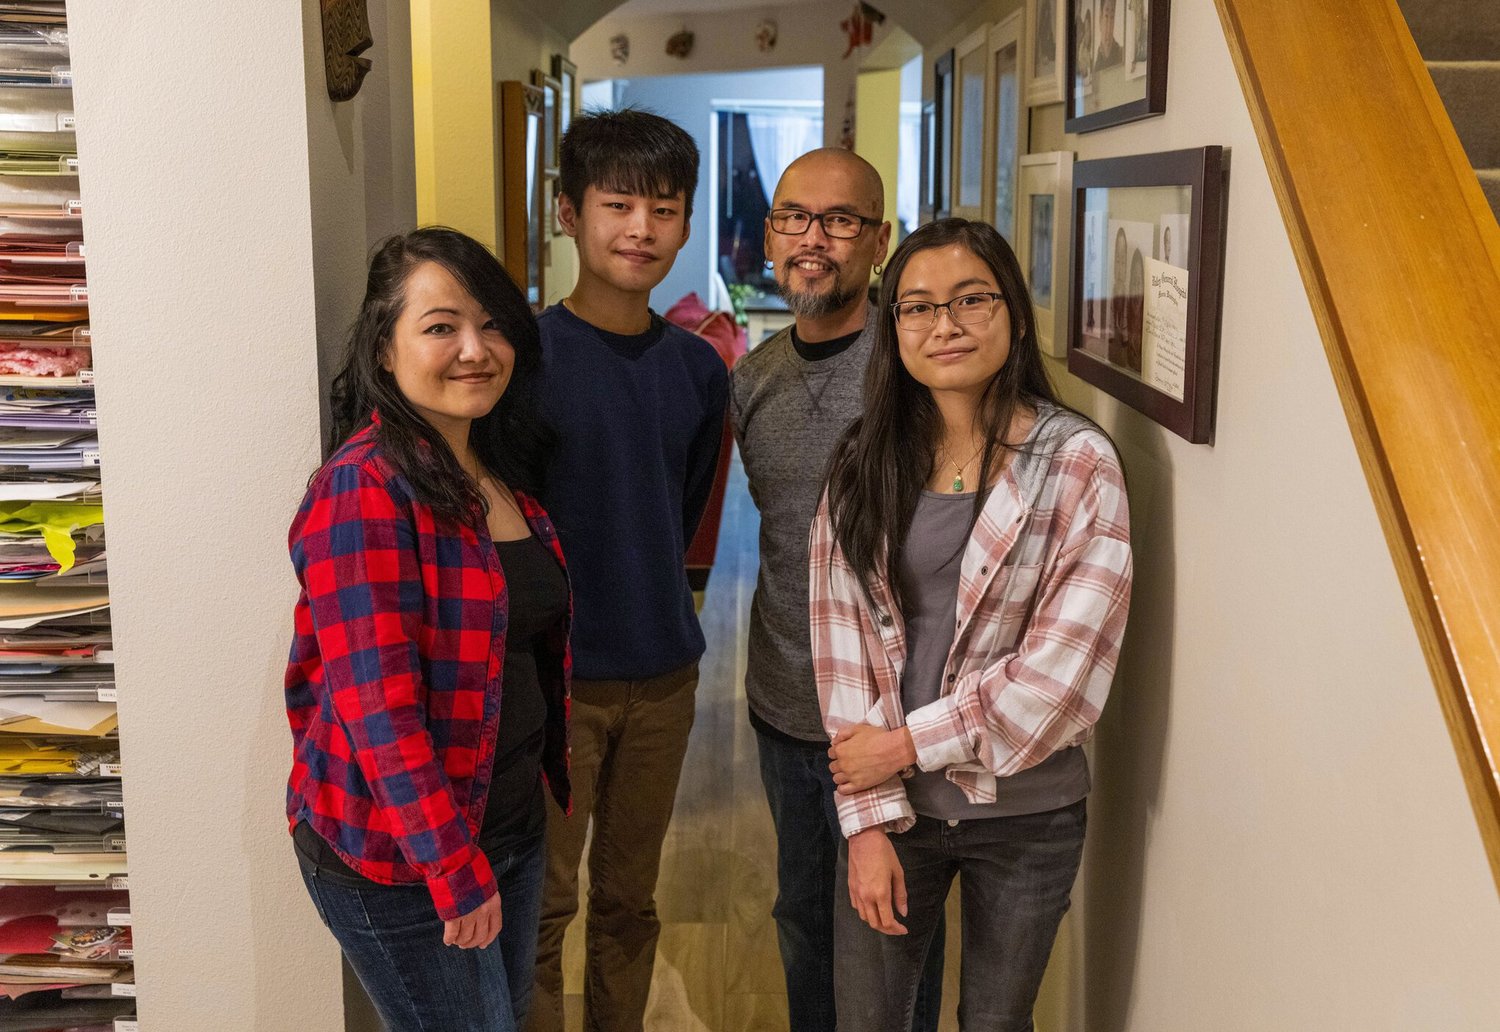 Son Duong (second from right) came to the U.S. as a child after the fall of Saigon. Now, he and his family (from left, wife Reina, son Nathan and daughter Cyan) want to help Afghan refugees resettle in the Seattle area through a new federal program.